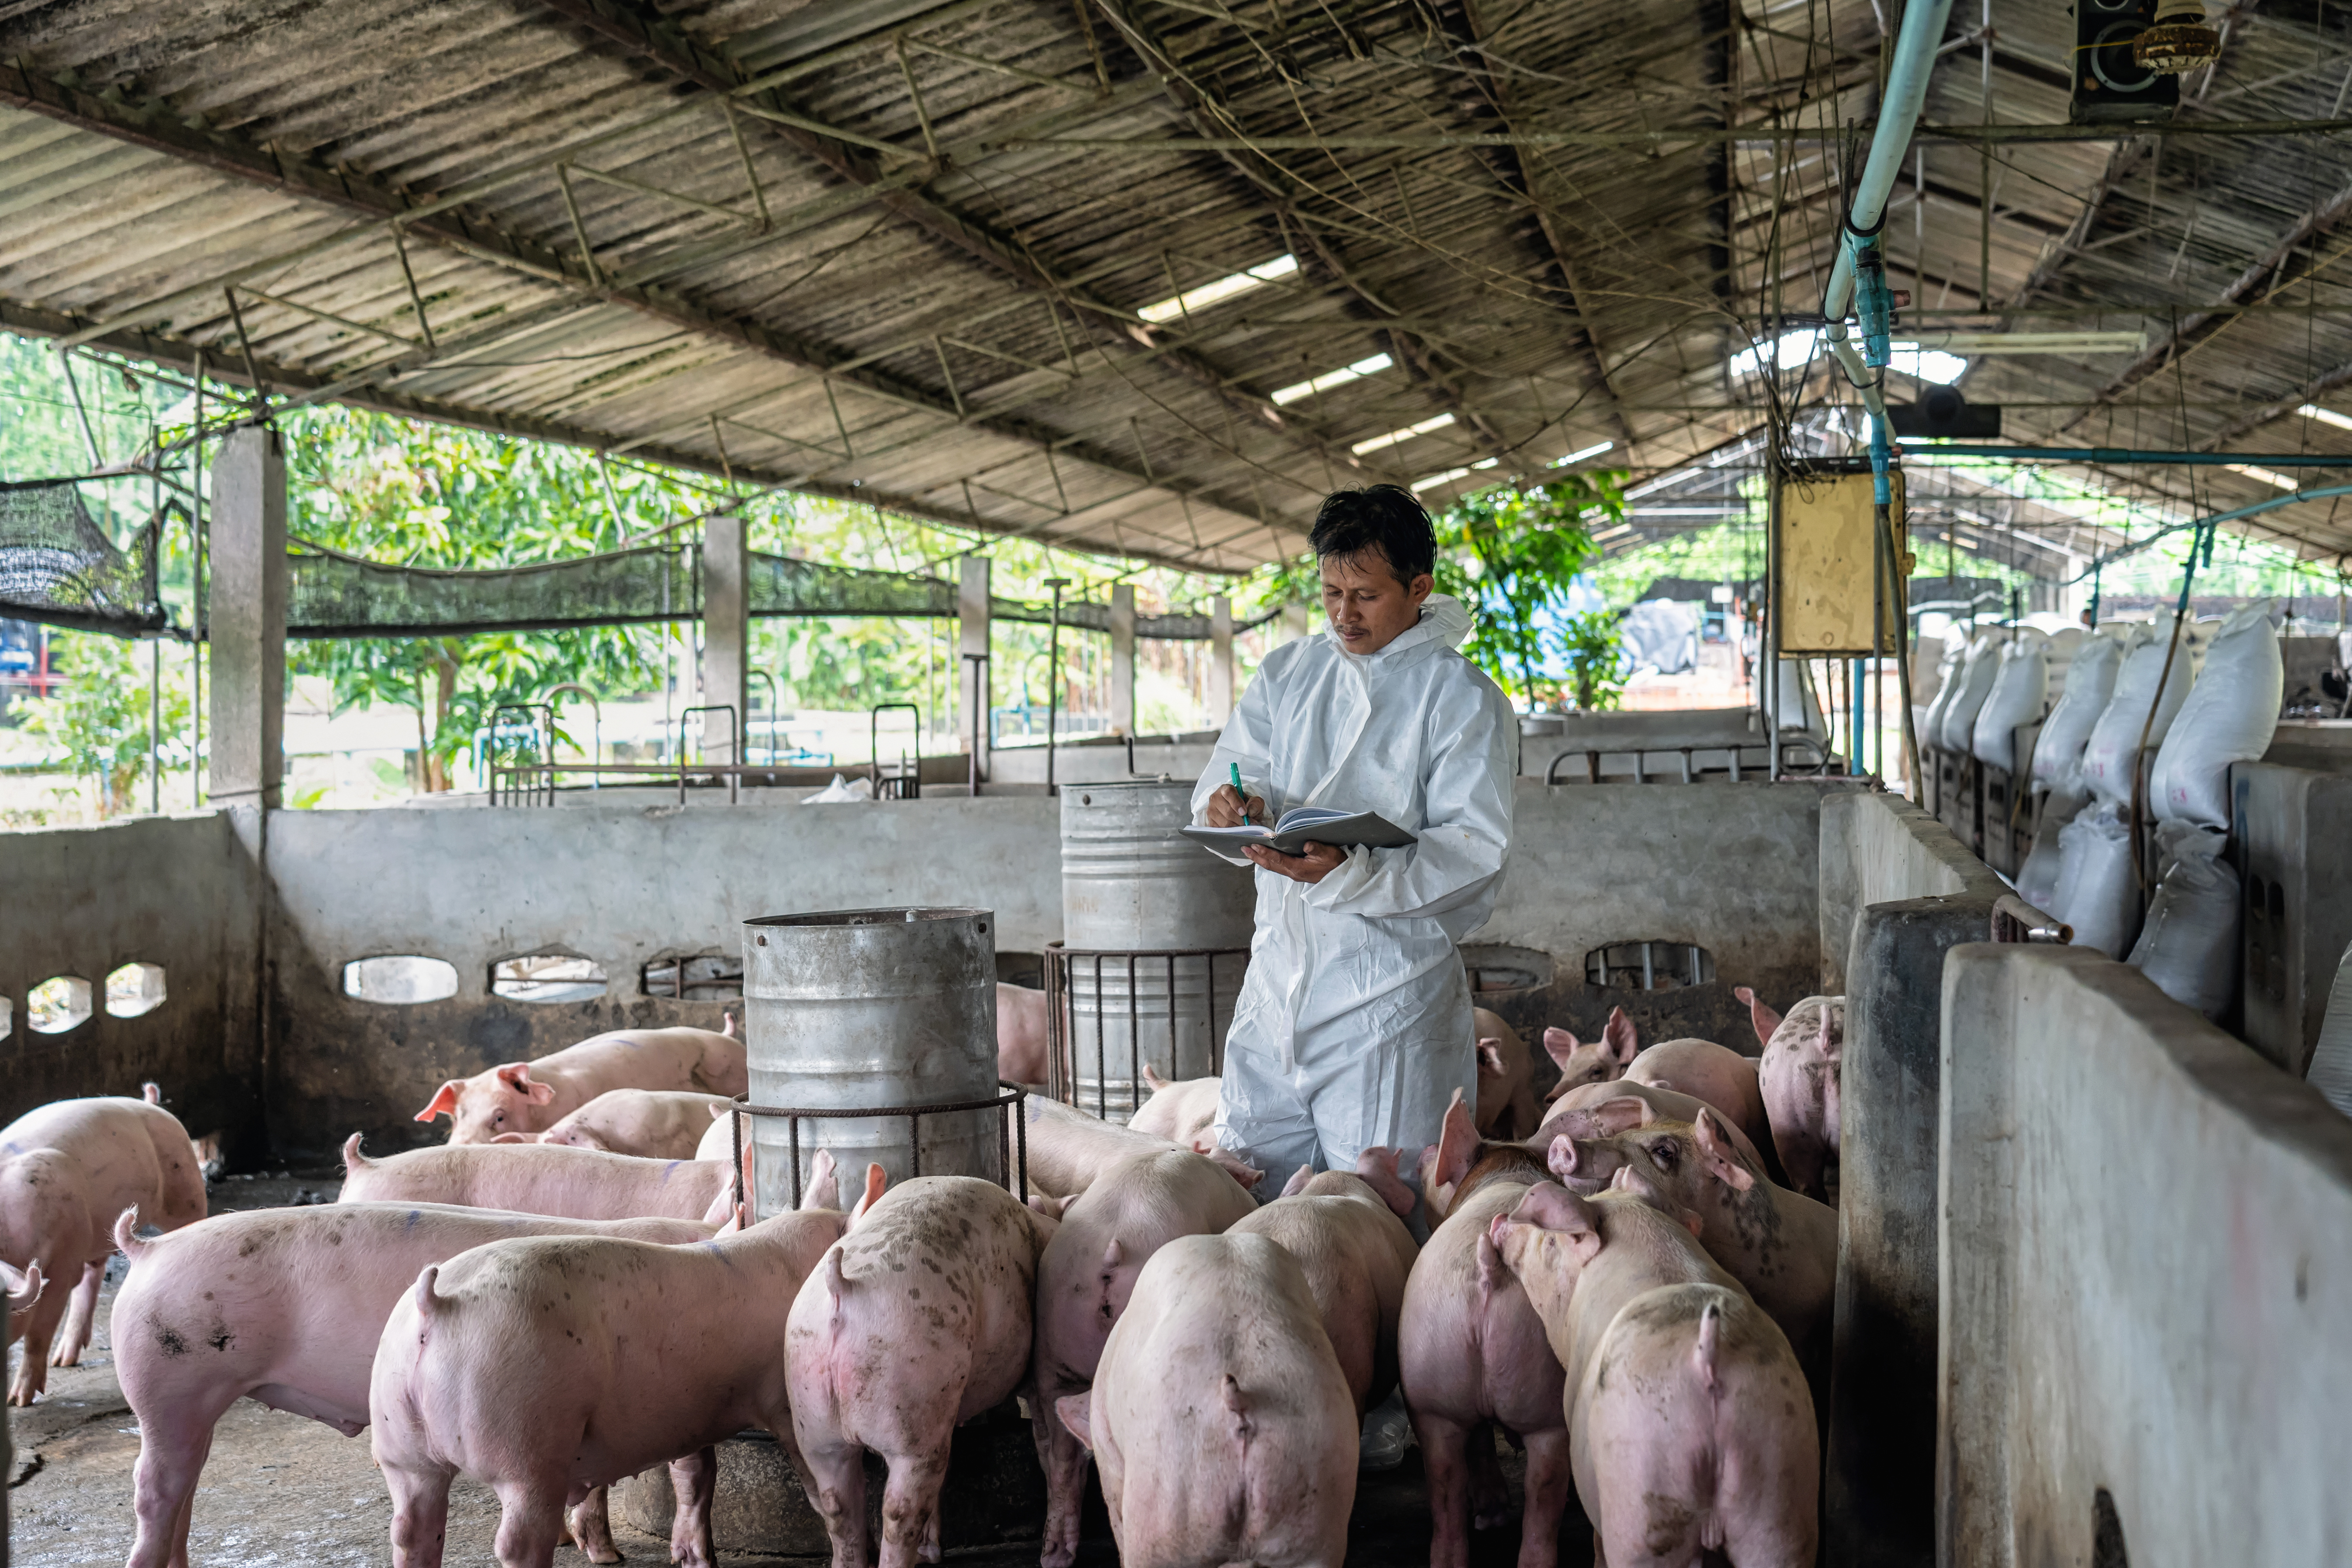 swine vet examines pig herd and takes notes